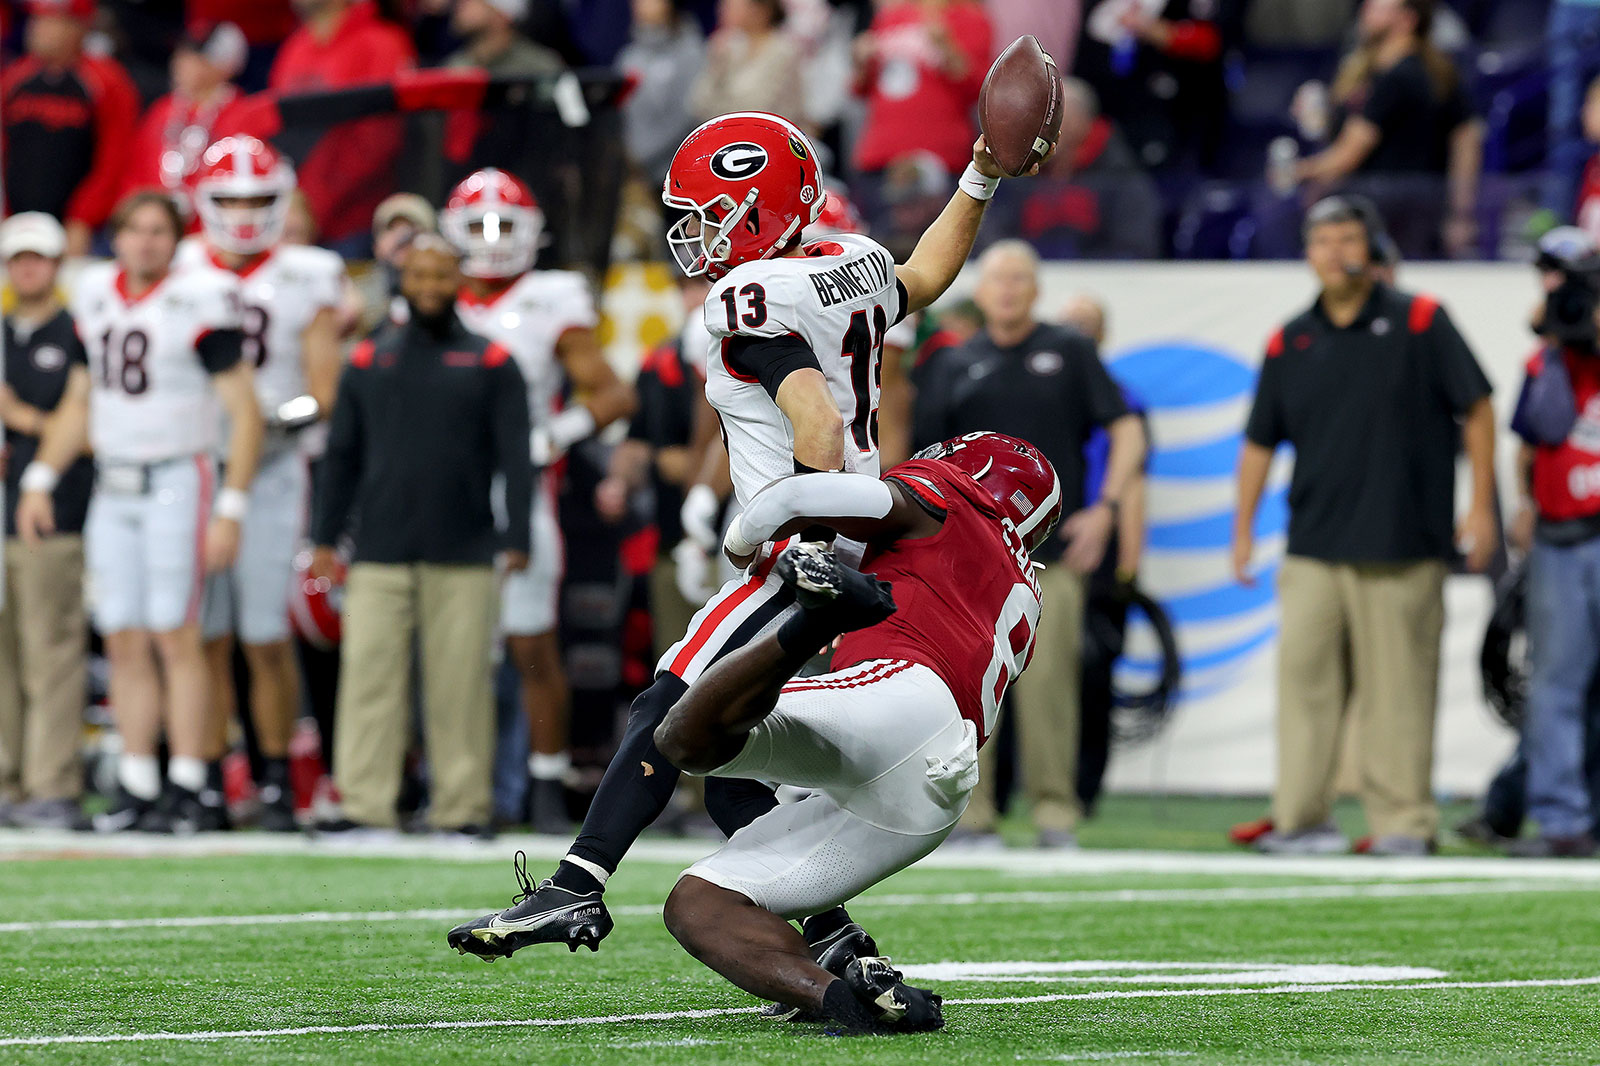 2022 College Football National Championship: Stetson Bennett rallies  Georgia past Alabama, wins first national title since 1980 - The Athletic